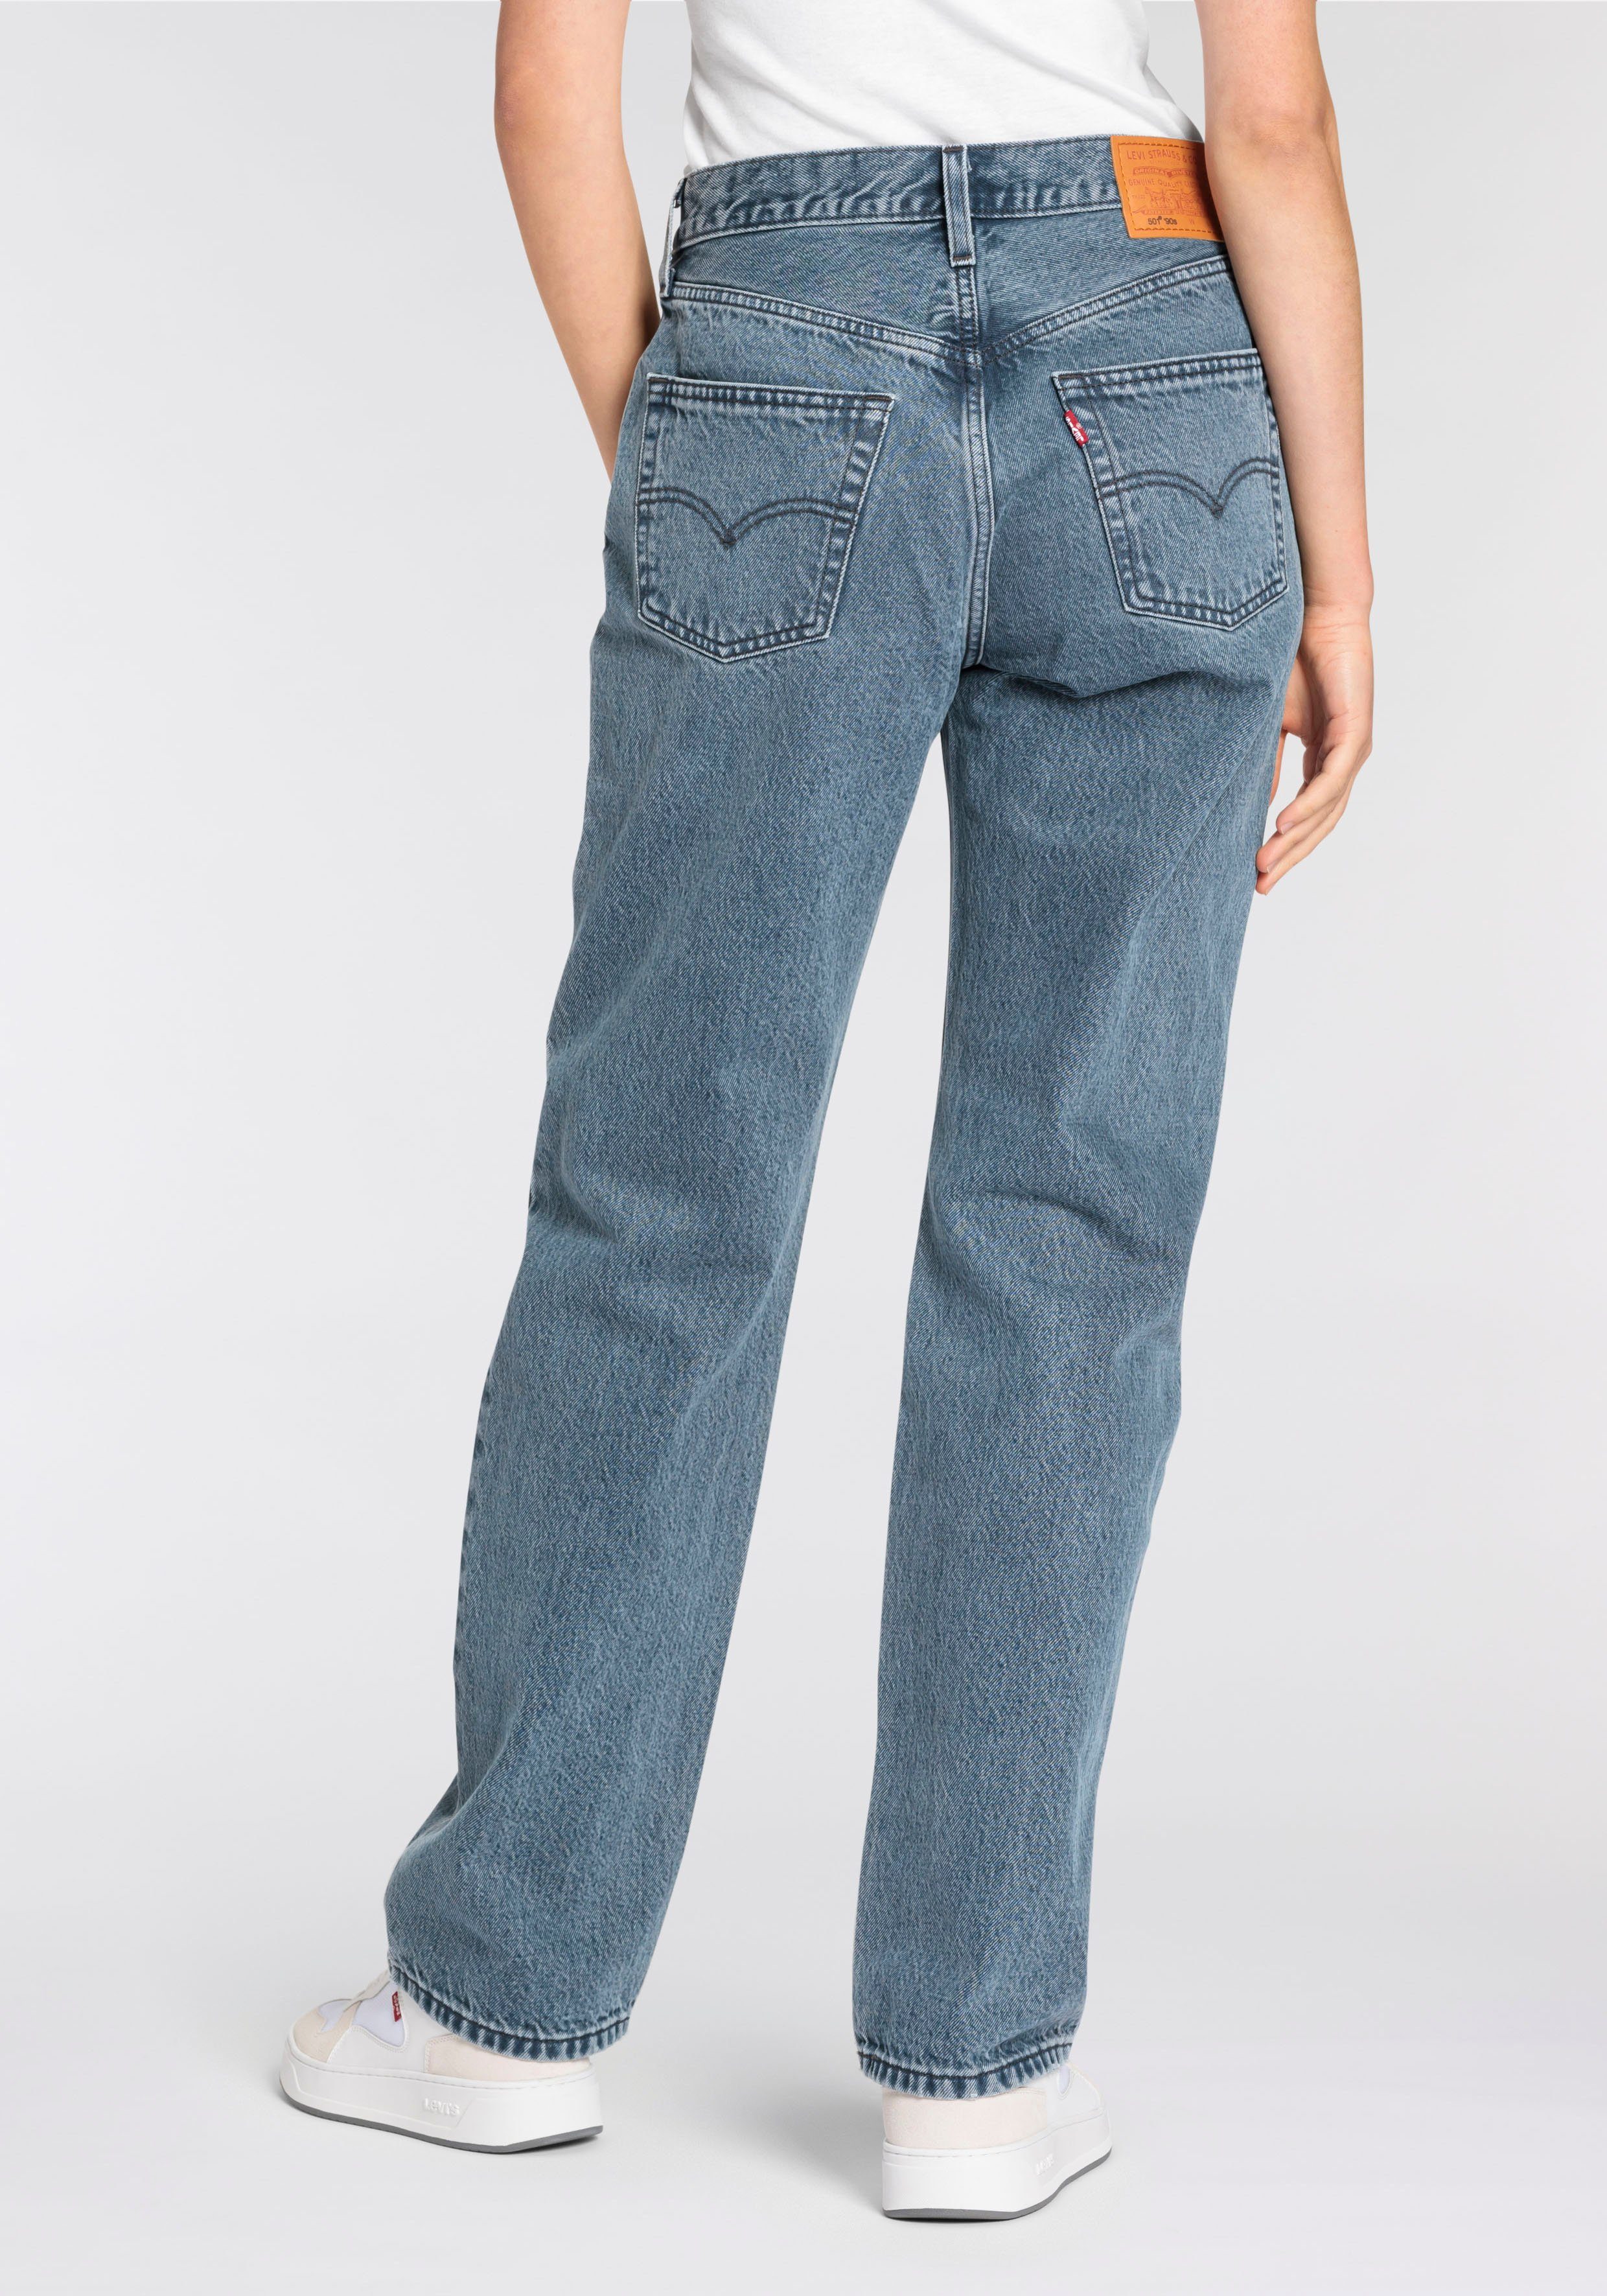 Weite multi 501 Collection 501 Levi's® 90'S denim Jeans